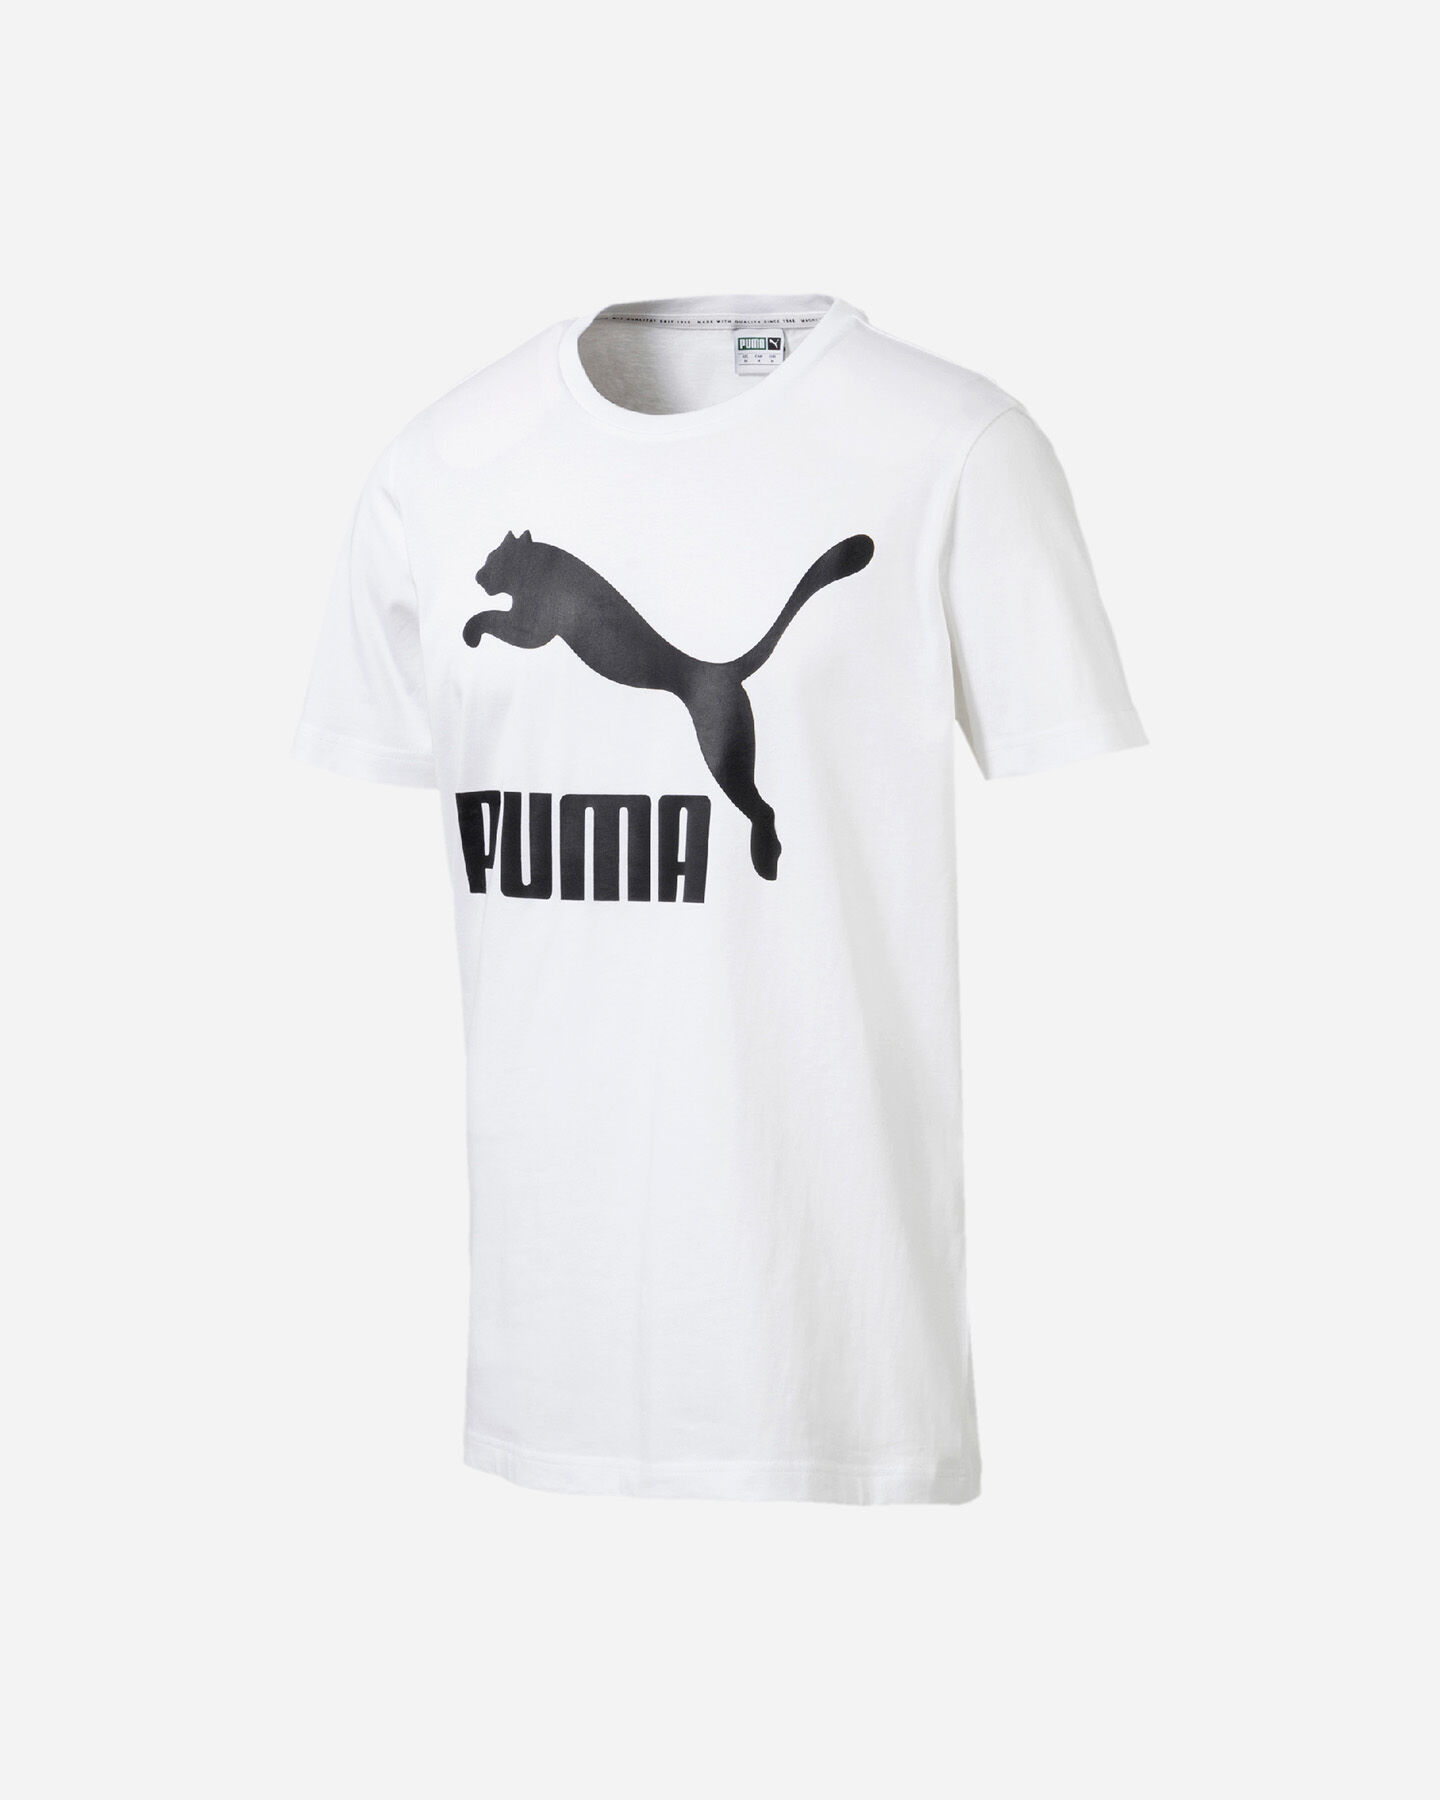  T-Shirt PUMA RS 9.8 SPACE CLASSIC M S5093147|02|S scatto 0